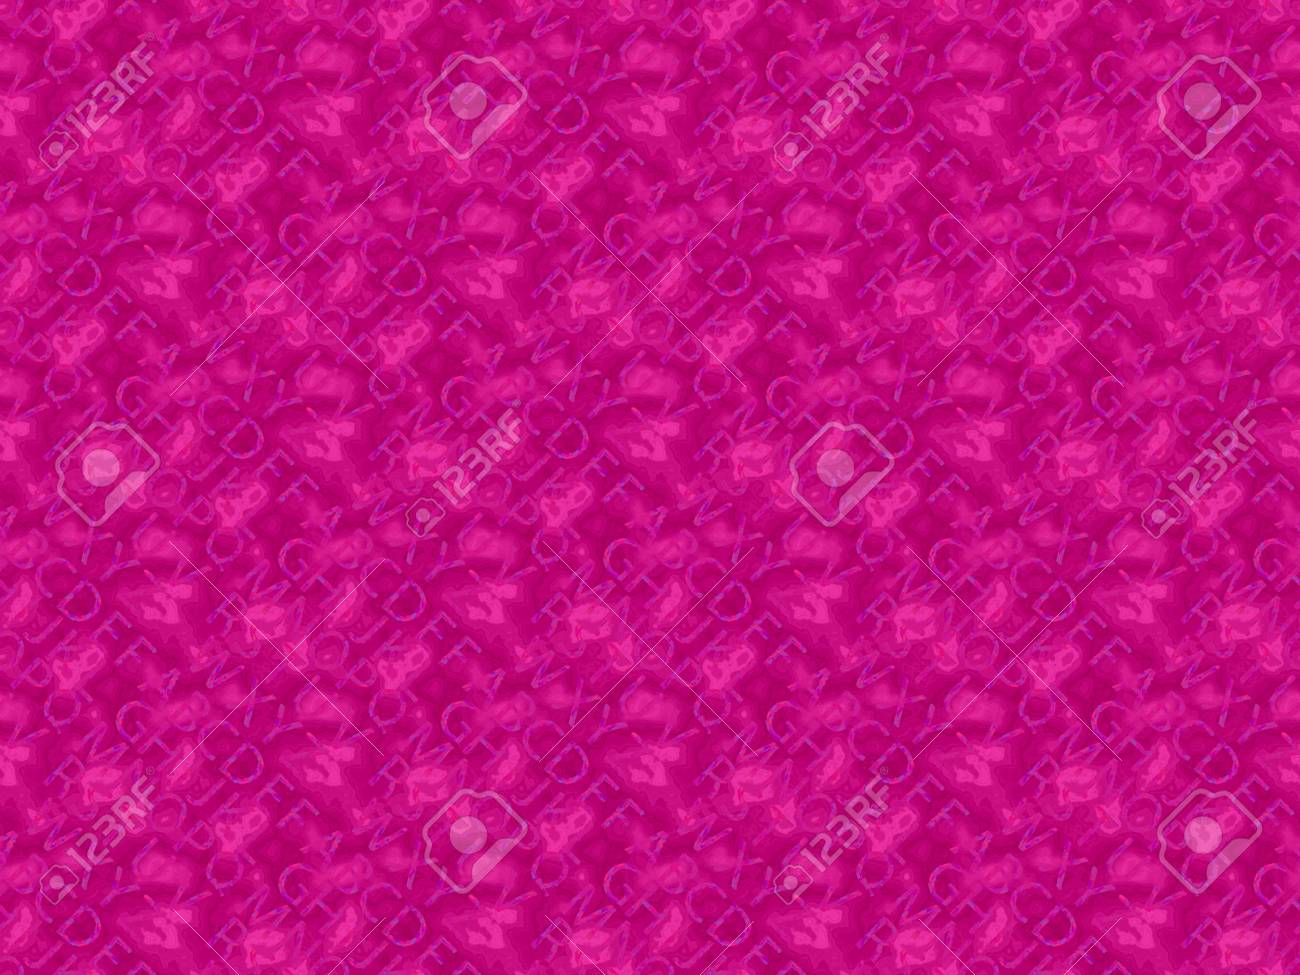 Abstract Endless Continuing Background With Pink Letters Stock